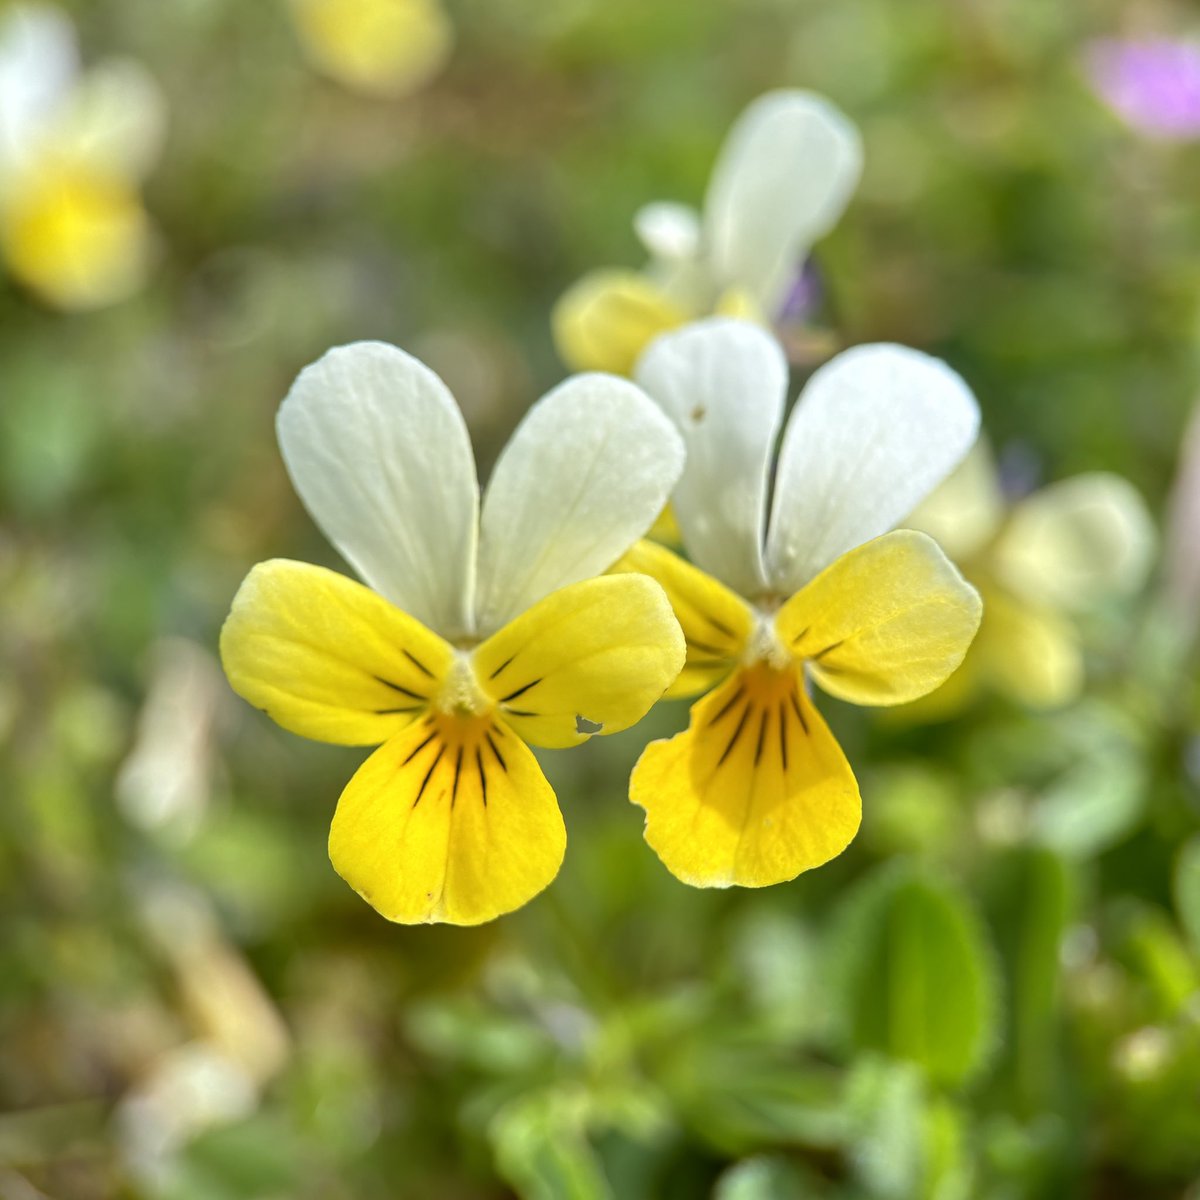 One of my favourite wild flowers - Sand Pansy (Viola tricolor subsp. curtisii) I love the flash of blue on the sepals! - in the dunes at Braunton Burrows 🤩 @BSBIbotany @wildflower_hour